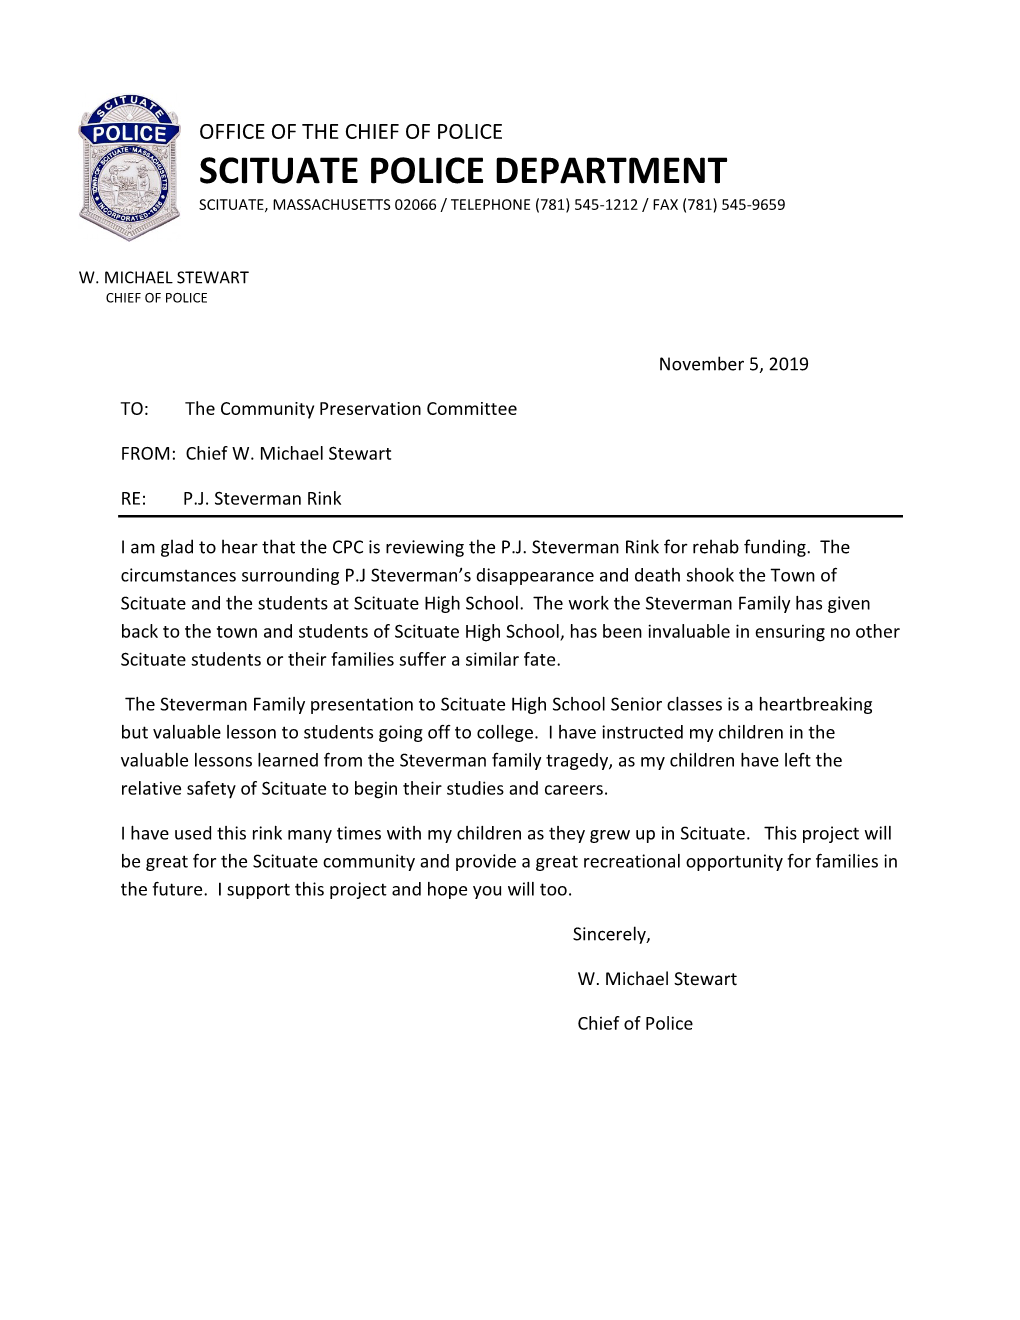 Scituate Police Department Scituate, Massachusetts 02066 / Telephone (781) 545-1212 / Fax (781) 545-9659